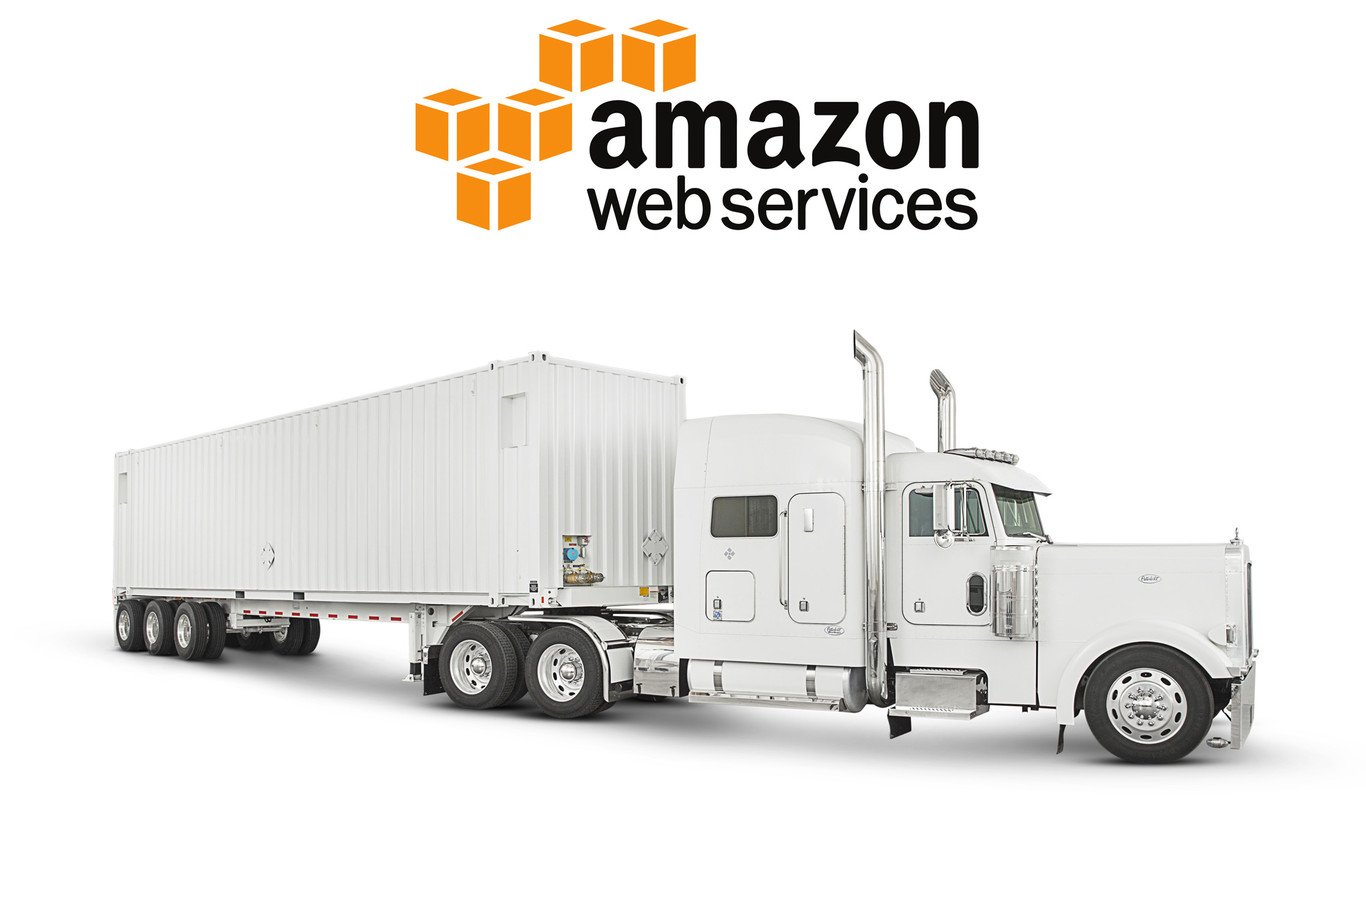 Store and Transfer Upto 100 Petabyte of Data using Amazon's Snowmobile